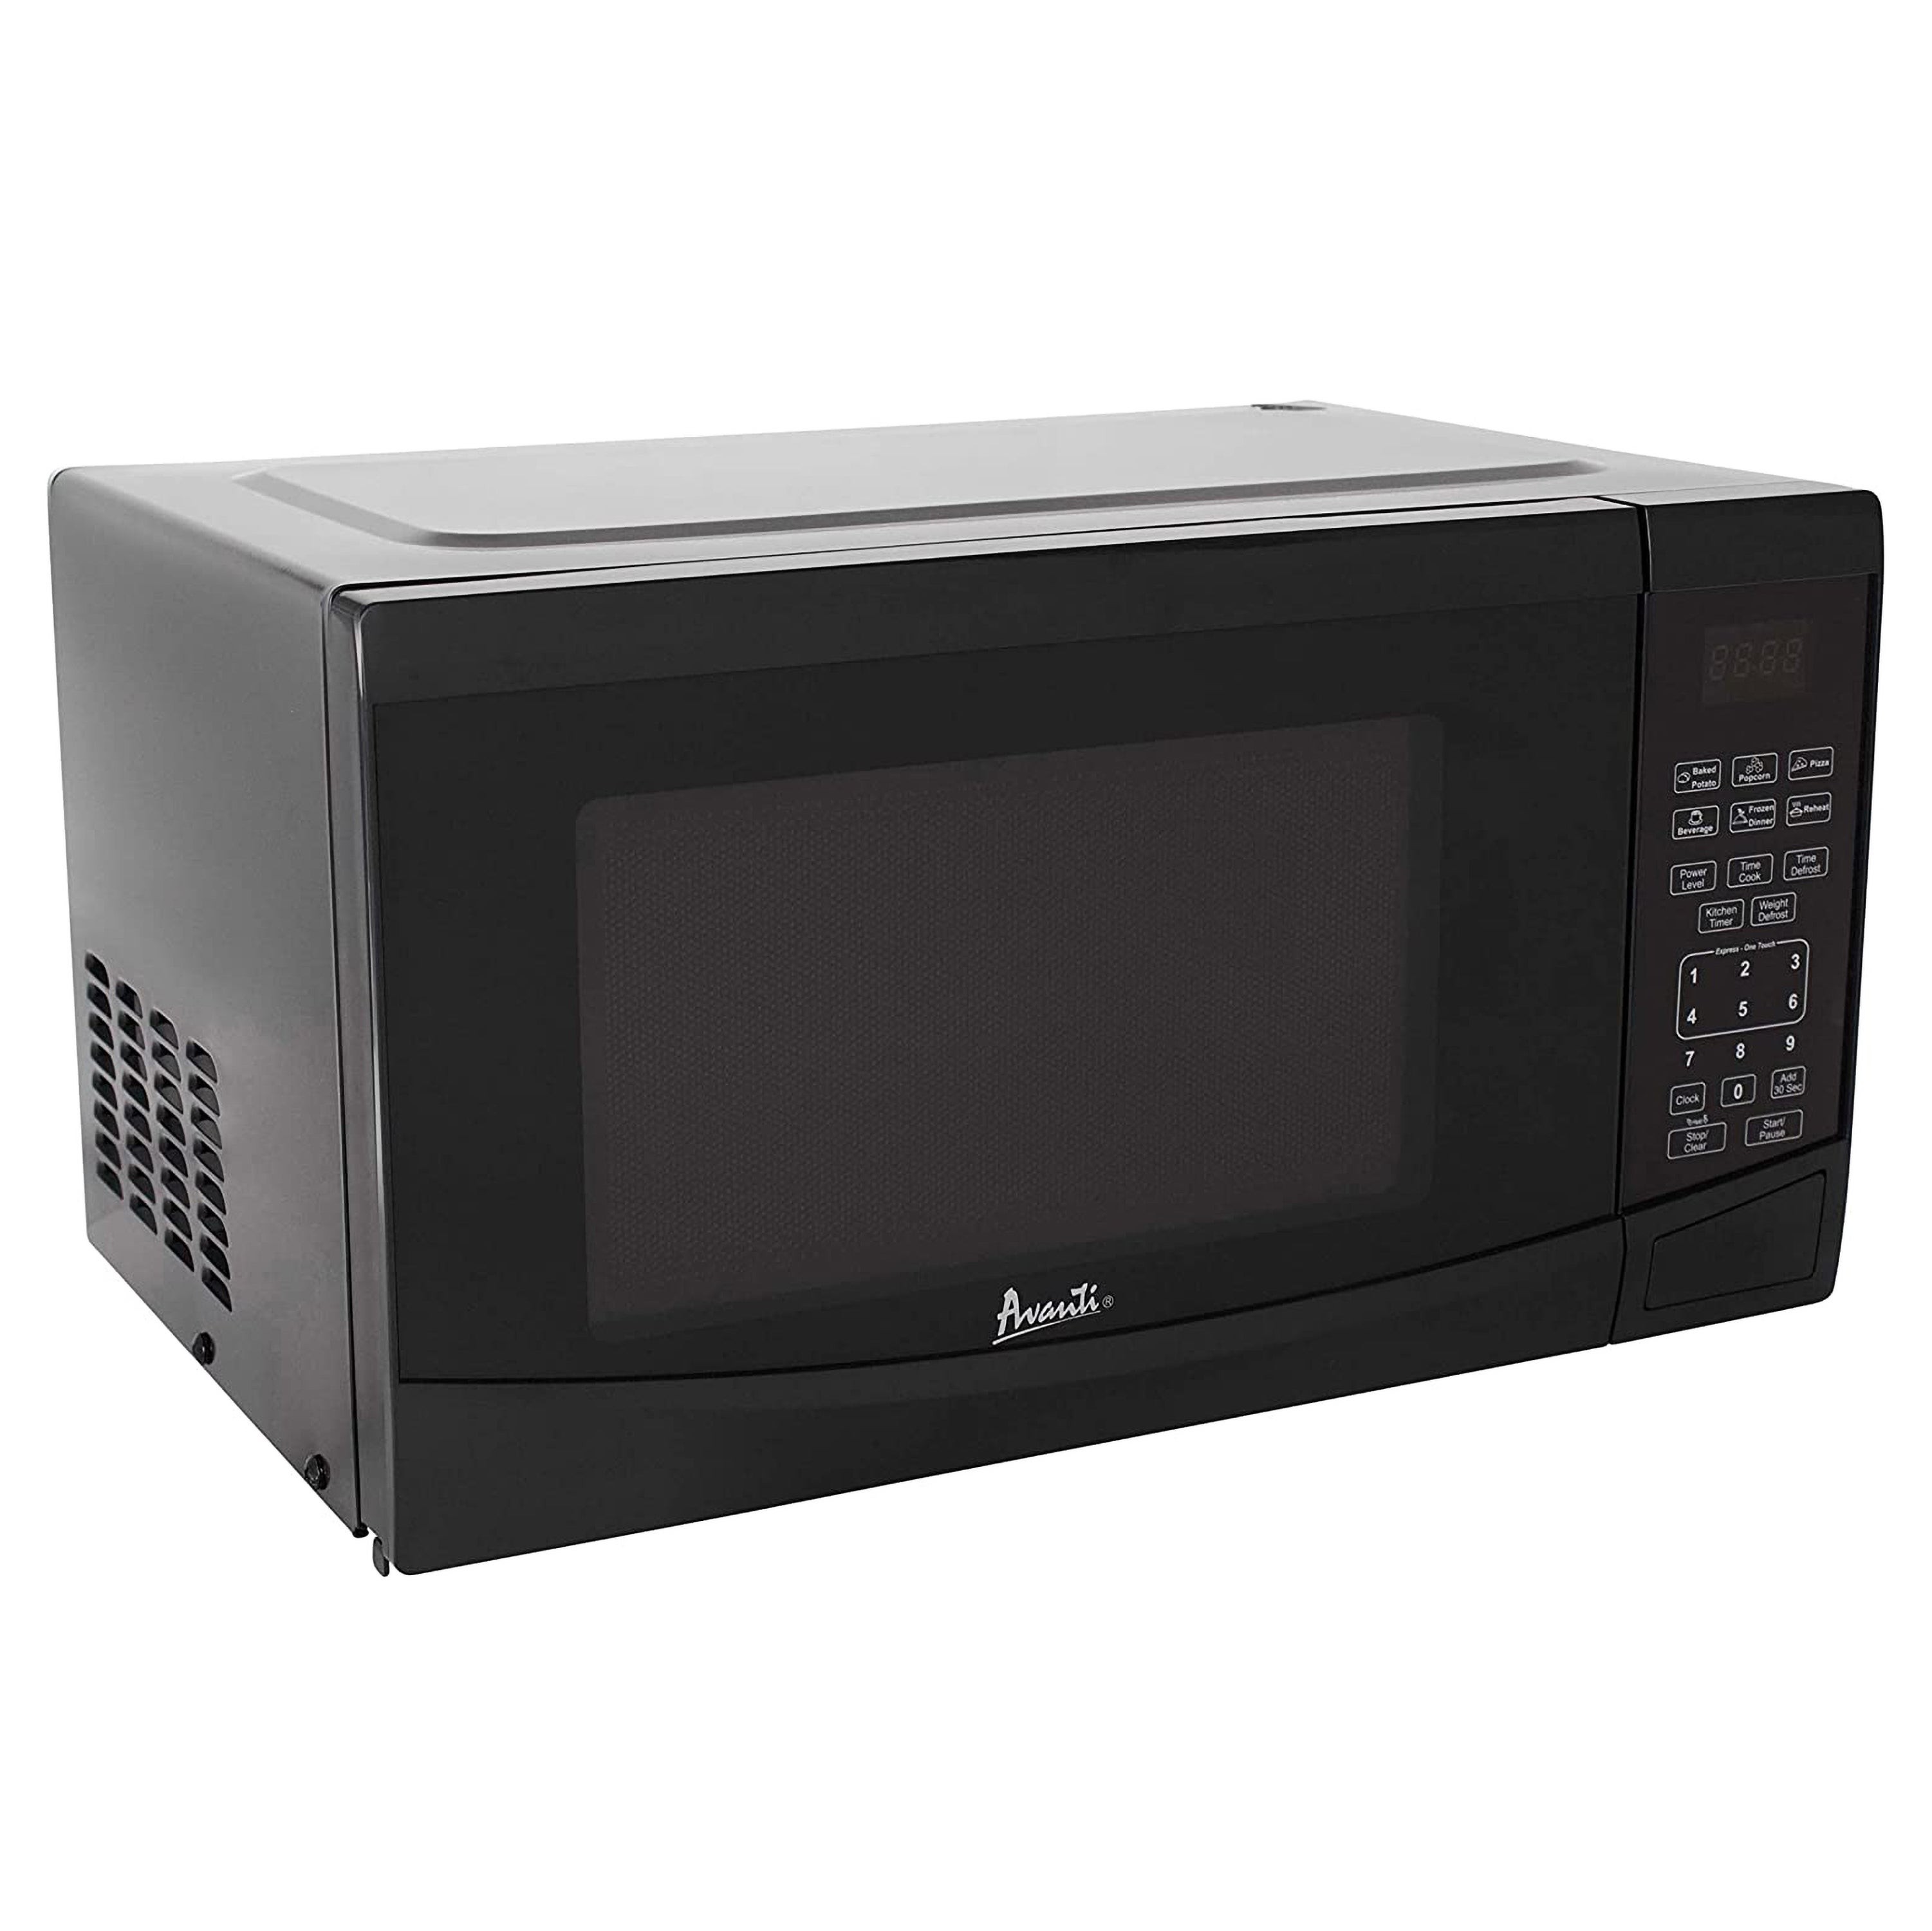 0.9 Cubic Foot 900W Microwave Oven Black